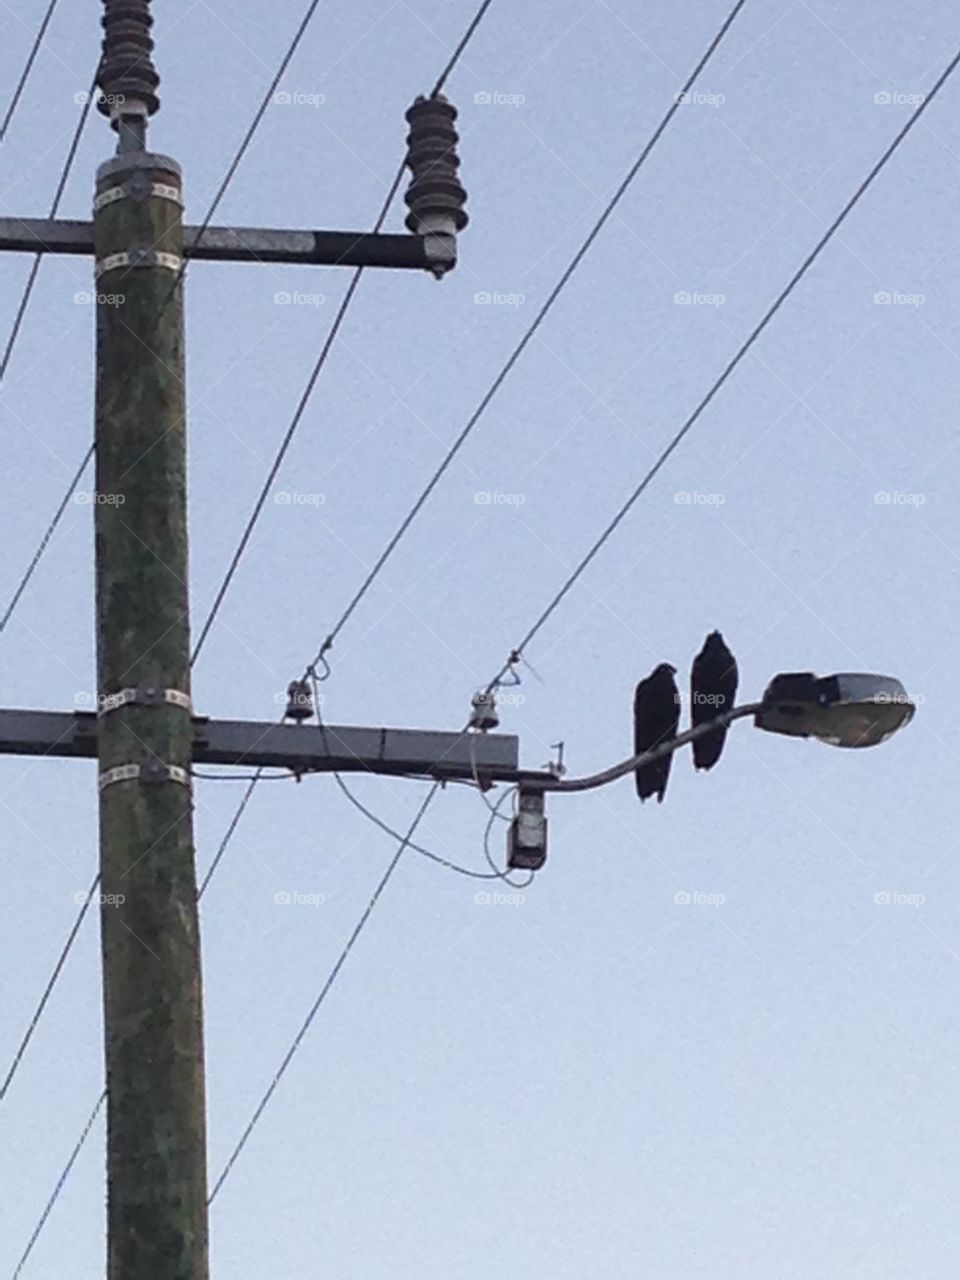 Crows on the street light